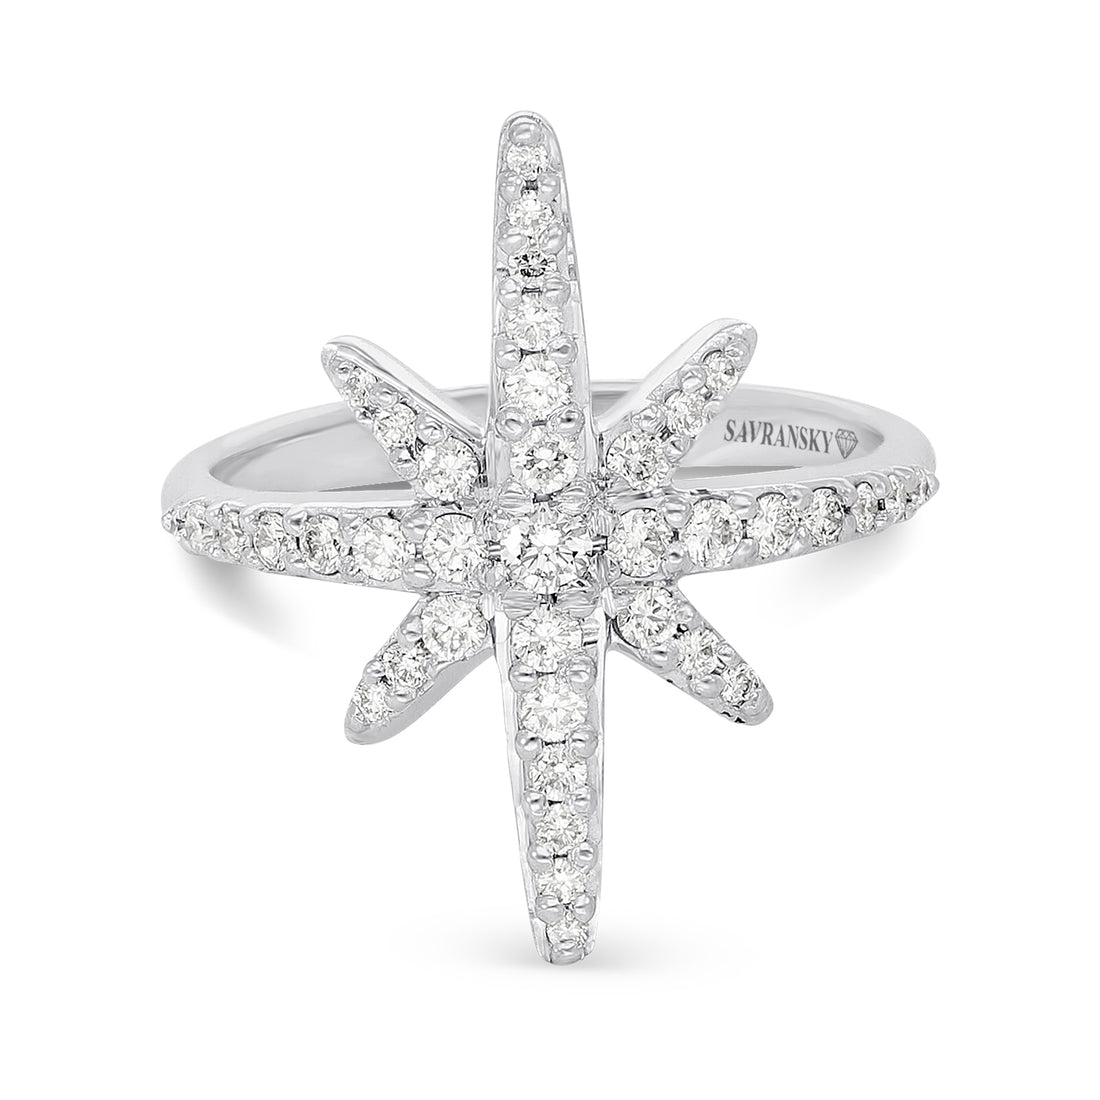 North Star Invisible Pave Diamond Elongated Ring